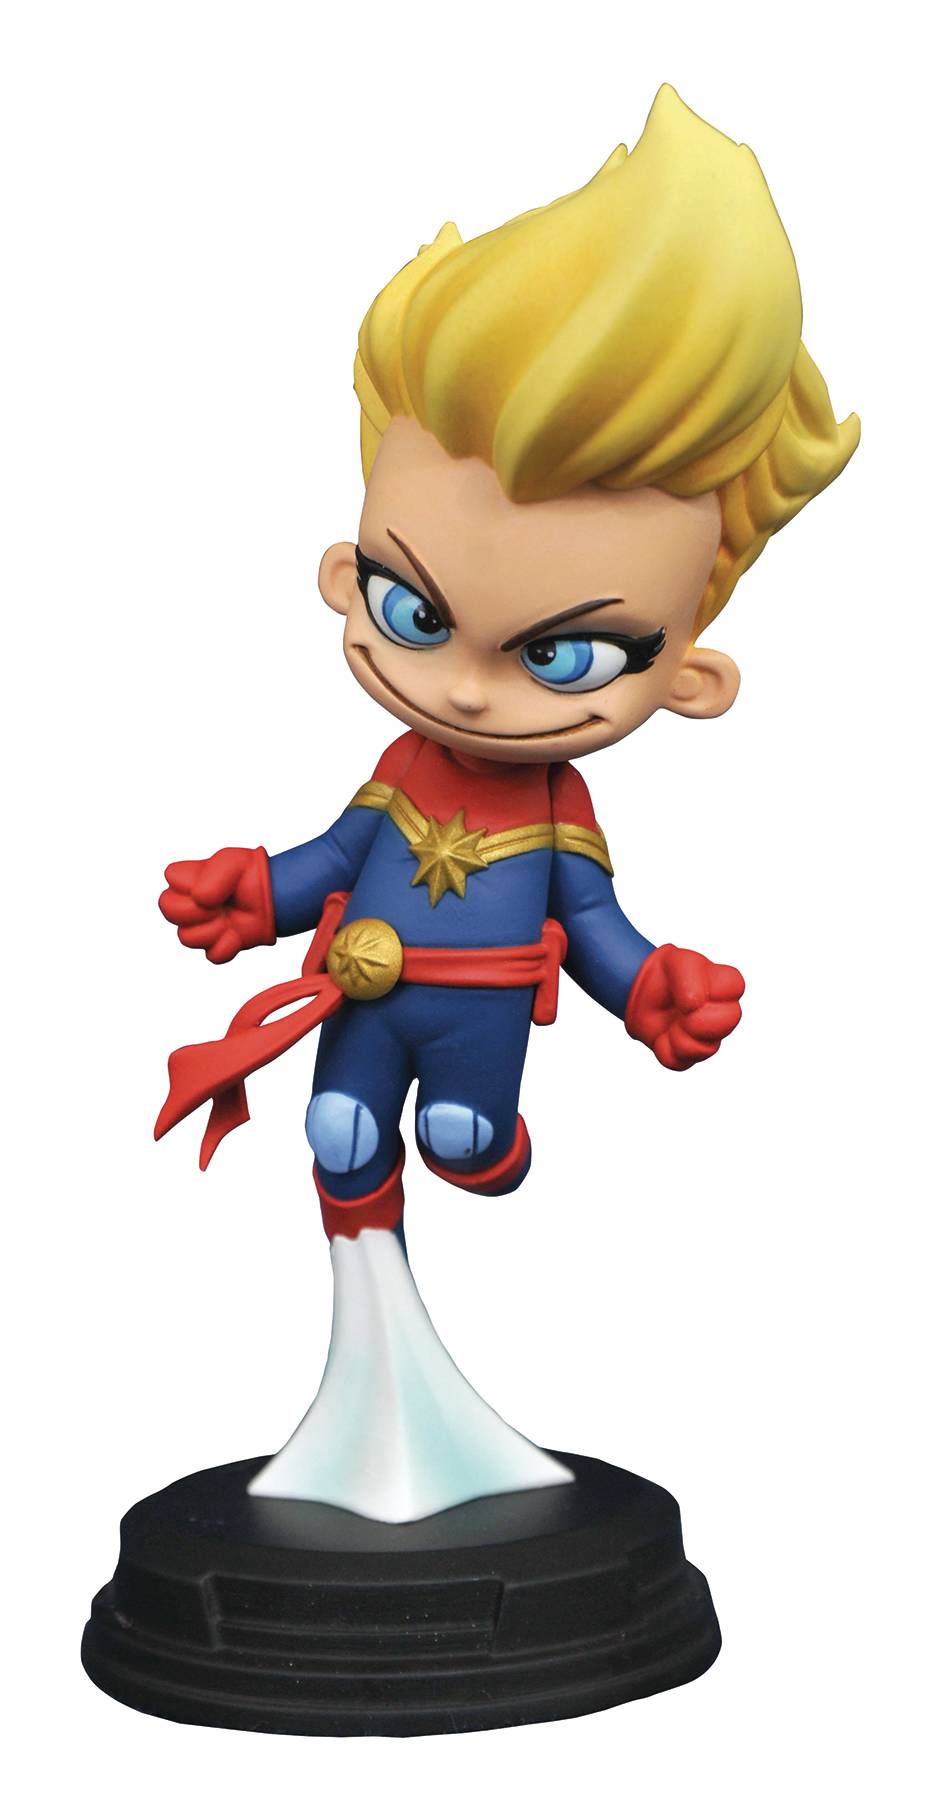 MARVEL ANIMATED STYLE CAPTAIN MARVEL STATUE